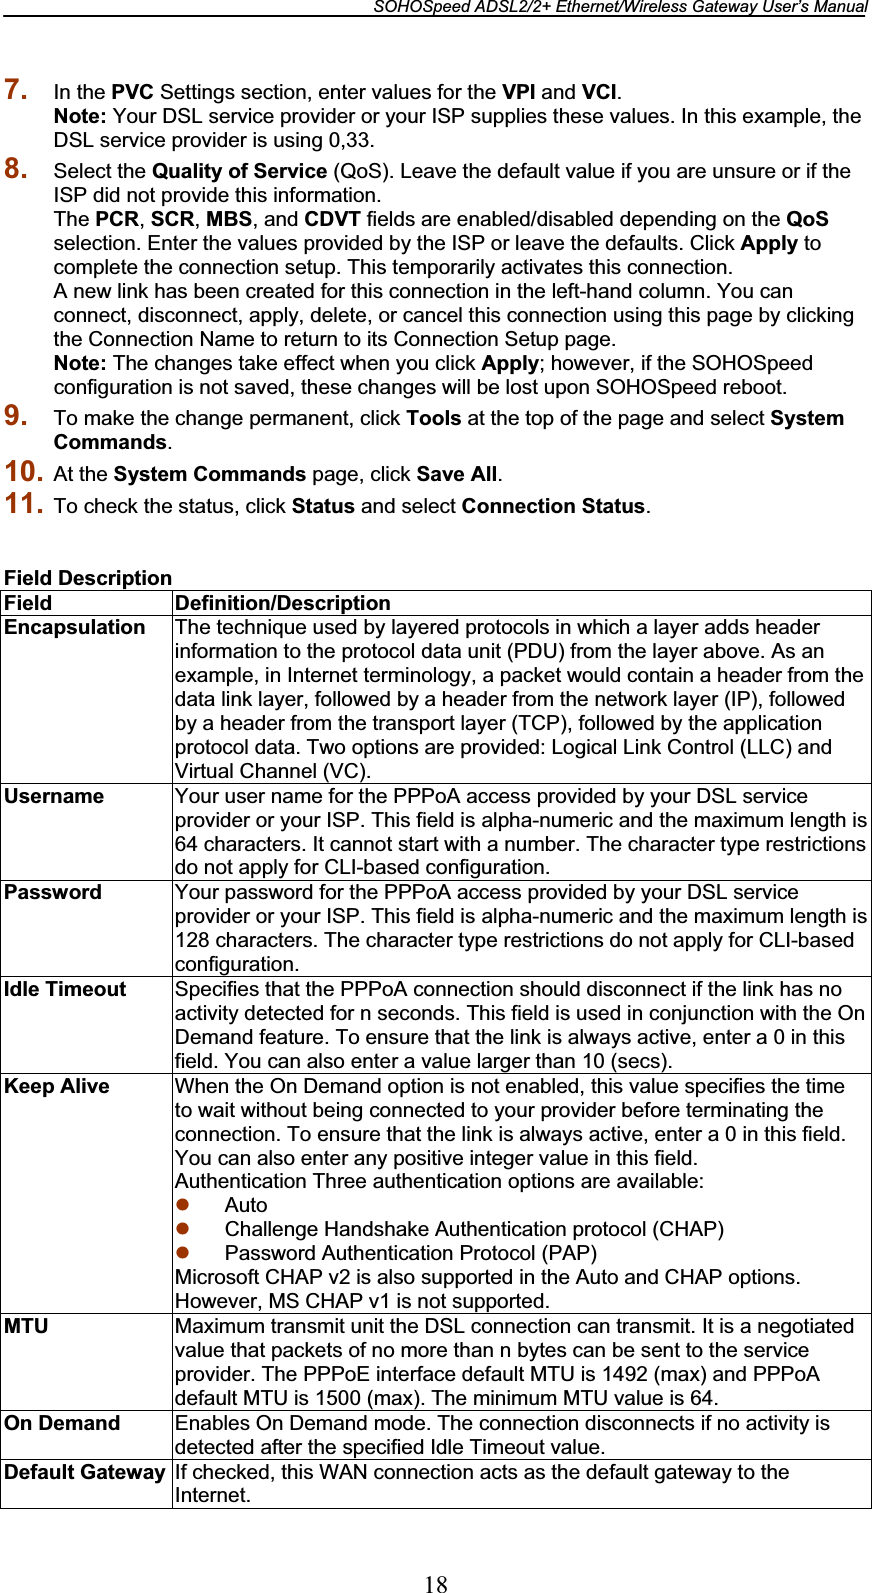 SOHOSpeed ADSL2/2+ Ethernet/Wireless Gateway User’s Manual 187. In the PVC Settings section, enter values for the VPI and VCI.Note: Your DSL service provider or your ISP supplies these values. In this example, the DSL service provider is using 0,33. 8. Select the Quality of Service (QoS). Leave the default value if you are unsure or if the ISP did not provide this information. The PCR,SCR,MBS, and CDVT fields are enabled/disabled depending on the QoSselection. Enter the values provided by the ISP or leave the defaults. Click Apply to complete the connection setup. This temporarily activates this connection. A new link has been created for this connection in the left-hand column. You can connect, disconnect, apply, delete, or cancel this connection using this page by clicking the Connection Name to return to its Connection Setup page. Note: The changes take effect when you click Apply; however, if the SOHOSpeed configuration is not saved, these changes will be lost upon SOHOSpeed reboot. 9. To make the change permanent, click Tools at the top of the page and select System Commands.10. At the System Commands page, click Save All.11. To check the status, click Status and select Connection Status.Field DescriptionField Definition/Description Encapsulation  The technique used by layered protocols in which a layer adds header information to the protocol data unit (PDU) from the layer above. As an example, in Internet terminology, a packet would contain a header from the data link layer, followed by a header from the network layer (IP), followed by a header from the transport layer (TCP), followed by the application protocol data. Two options are provided: Logical Link Control (LLC) and Virtual Channel (VC). Username  Your user name for the PPPoA access provided by your DSL service provider or your ISP. This field is alpha-numeric and the maximum length is 64 characters. It cannot start with a number. The character type restrictions do not apply for CLI-based configuration. Password  Your password for the PPPoA access provided by your DSL service provider or your ISP. This field is alpha-numeric and the maximum length is 128 characters. The character type restrictions do not apply for CLI-based configuration. Idle Timeout  Specifies that the PPPoA connection should disconnect if the link has no activity detected for n seconds. This field is used in conjunction with the On Demand feature. To ensure that the link is always active, enter a 0 in this field. You can also enter a value larger than 10 (secs). Keep Alive  When the On Demand option is not enabled, this value specifies the time to wait without being connected to your provider before terminating the connection. To ensure that the link is always active, enter a 0 in this field. You can also enter any positive integer value in this field. Authentication Three authentication options are available: z Autoz Challenge Handshake Authentication protocol (CHAP) z Password Authentication Protocol (PAP) Microsoft CHAP v2 is also supported in the Auto and CHAP options. However, MS CHAP v1 is not supported. MTU Maximum transmit unit the DSL connection can transmit. It is a negotiated value that packets of no more than n bytes can be sent to the service provider. The PPPoE interface default MTU is 1492 (max) and PPPoA default MTU is 1500 (max). The minimum MTU value is 64. On Demand  Enables On Demand mode. The connection disconnects if no activity is detected after the specified Idle Timeout value. Default Gateway  If checked, this WAN connection acts as the default gateway to the Internet.